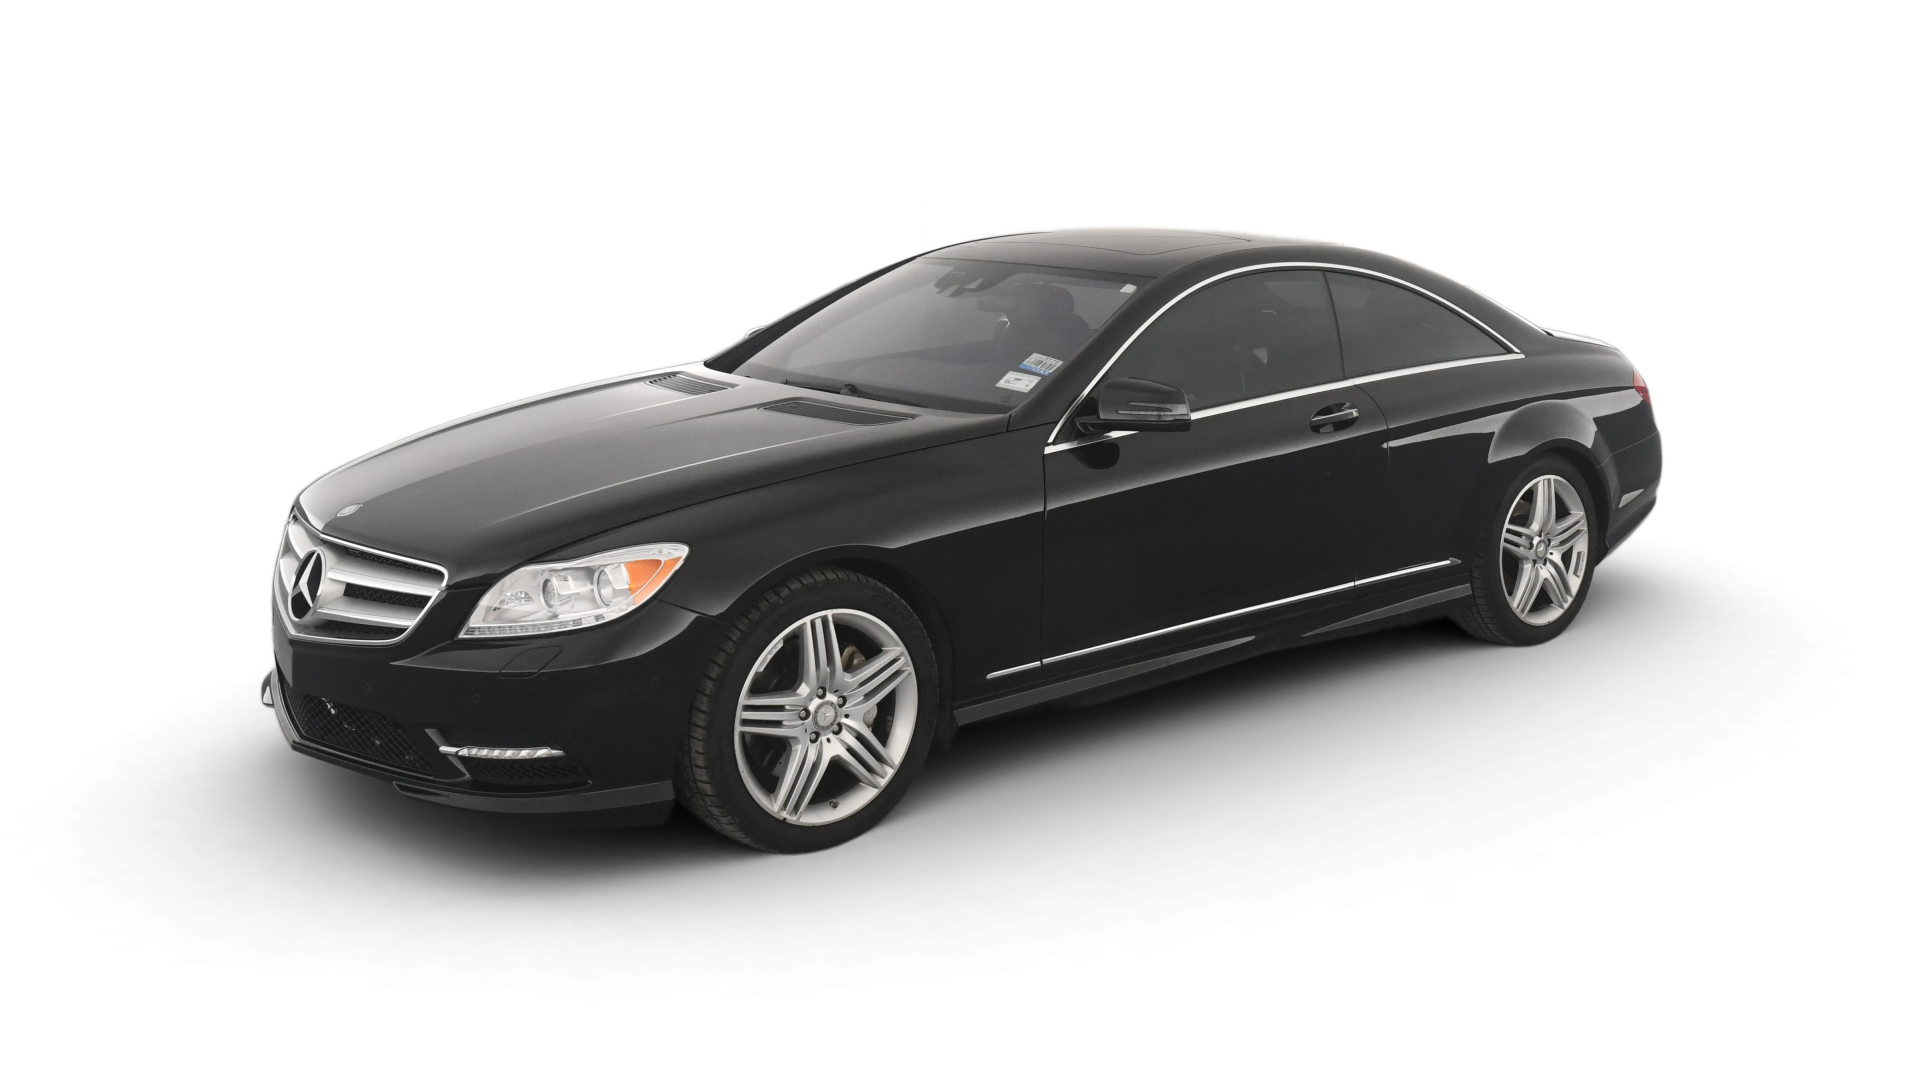 Used Mercedes-Benz CL-Class For Sale Online | Carvana